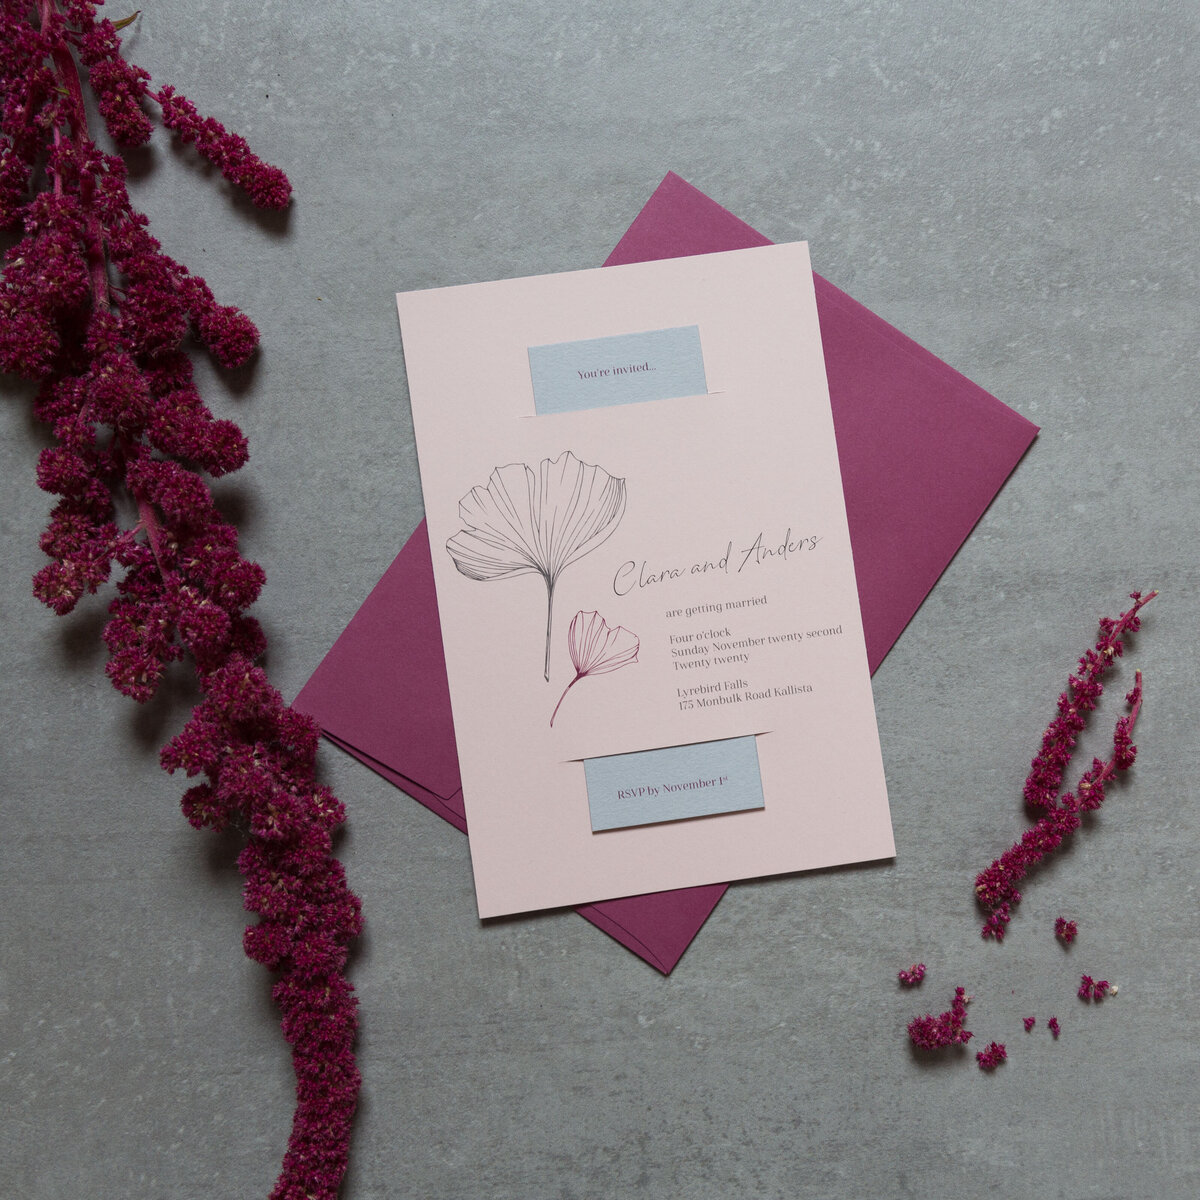 Pink and purple wedding invitation with a ginkgo leaf graphic and a grey RSVP card sitting inside the invitation.